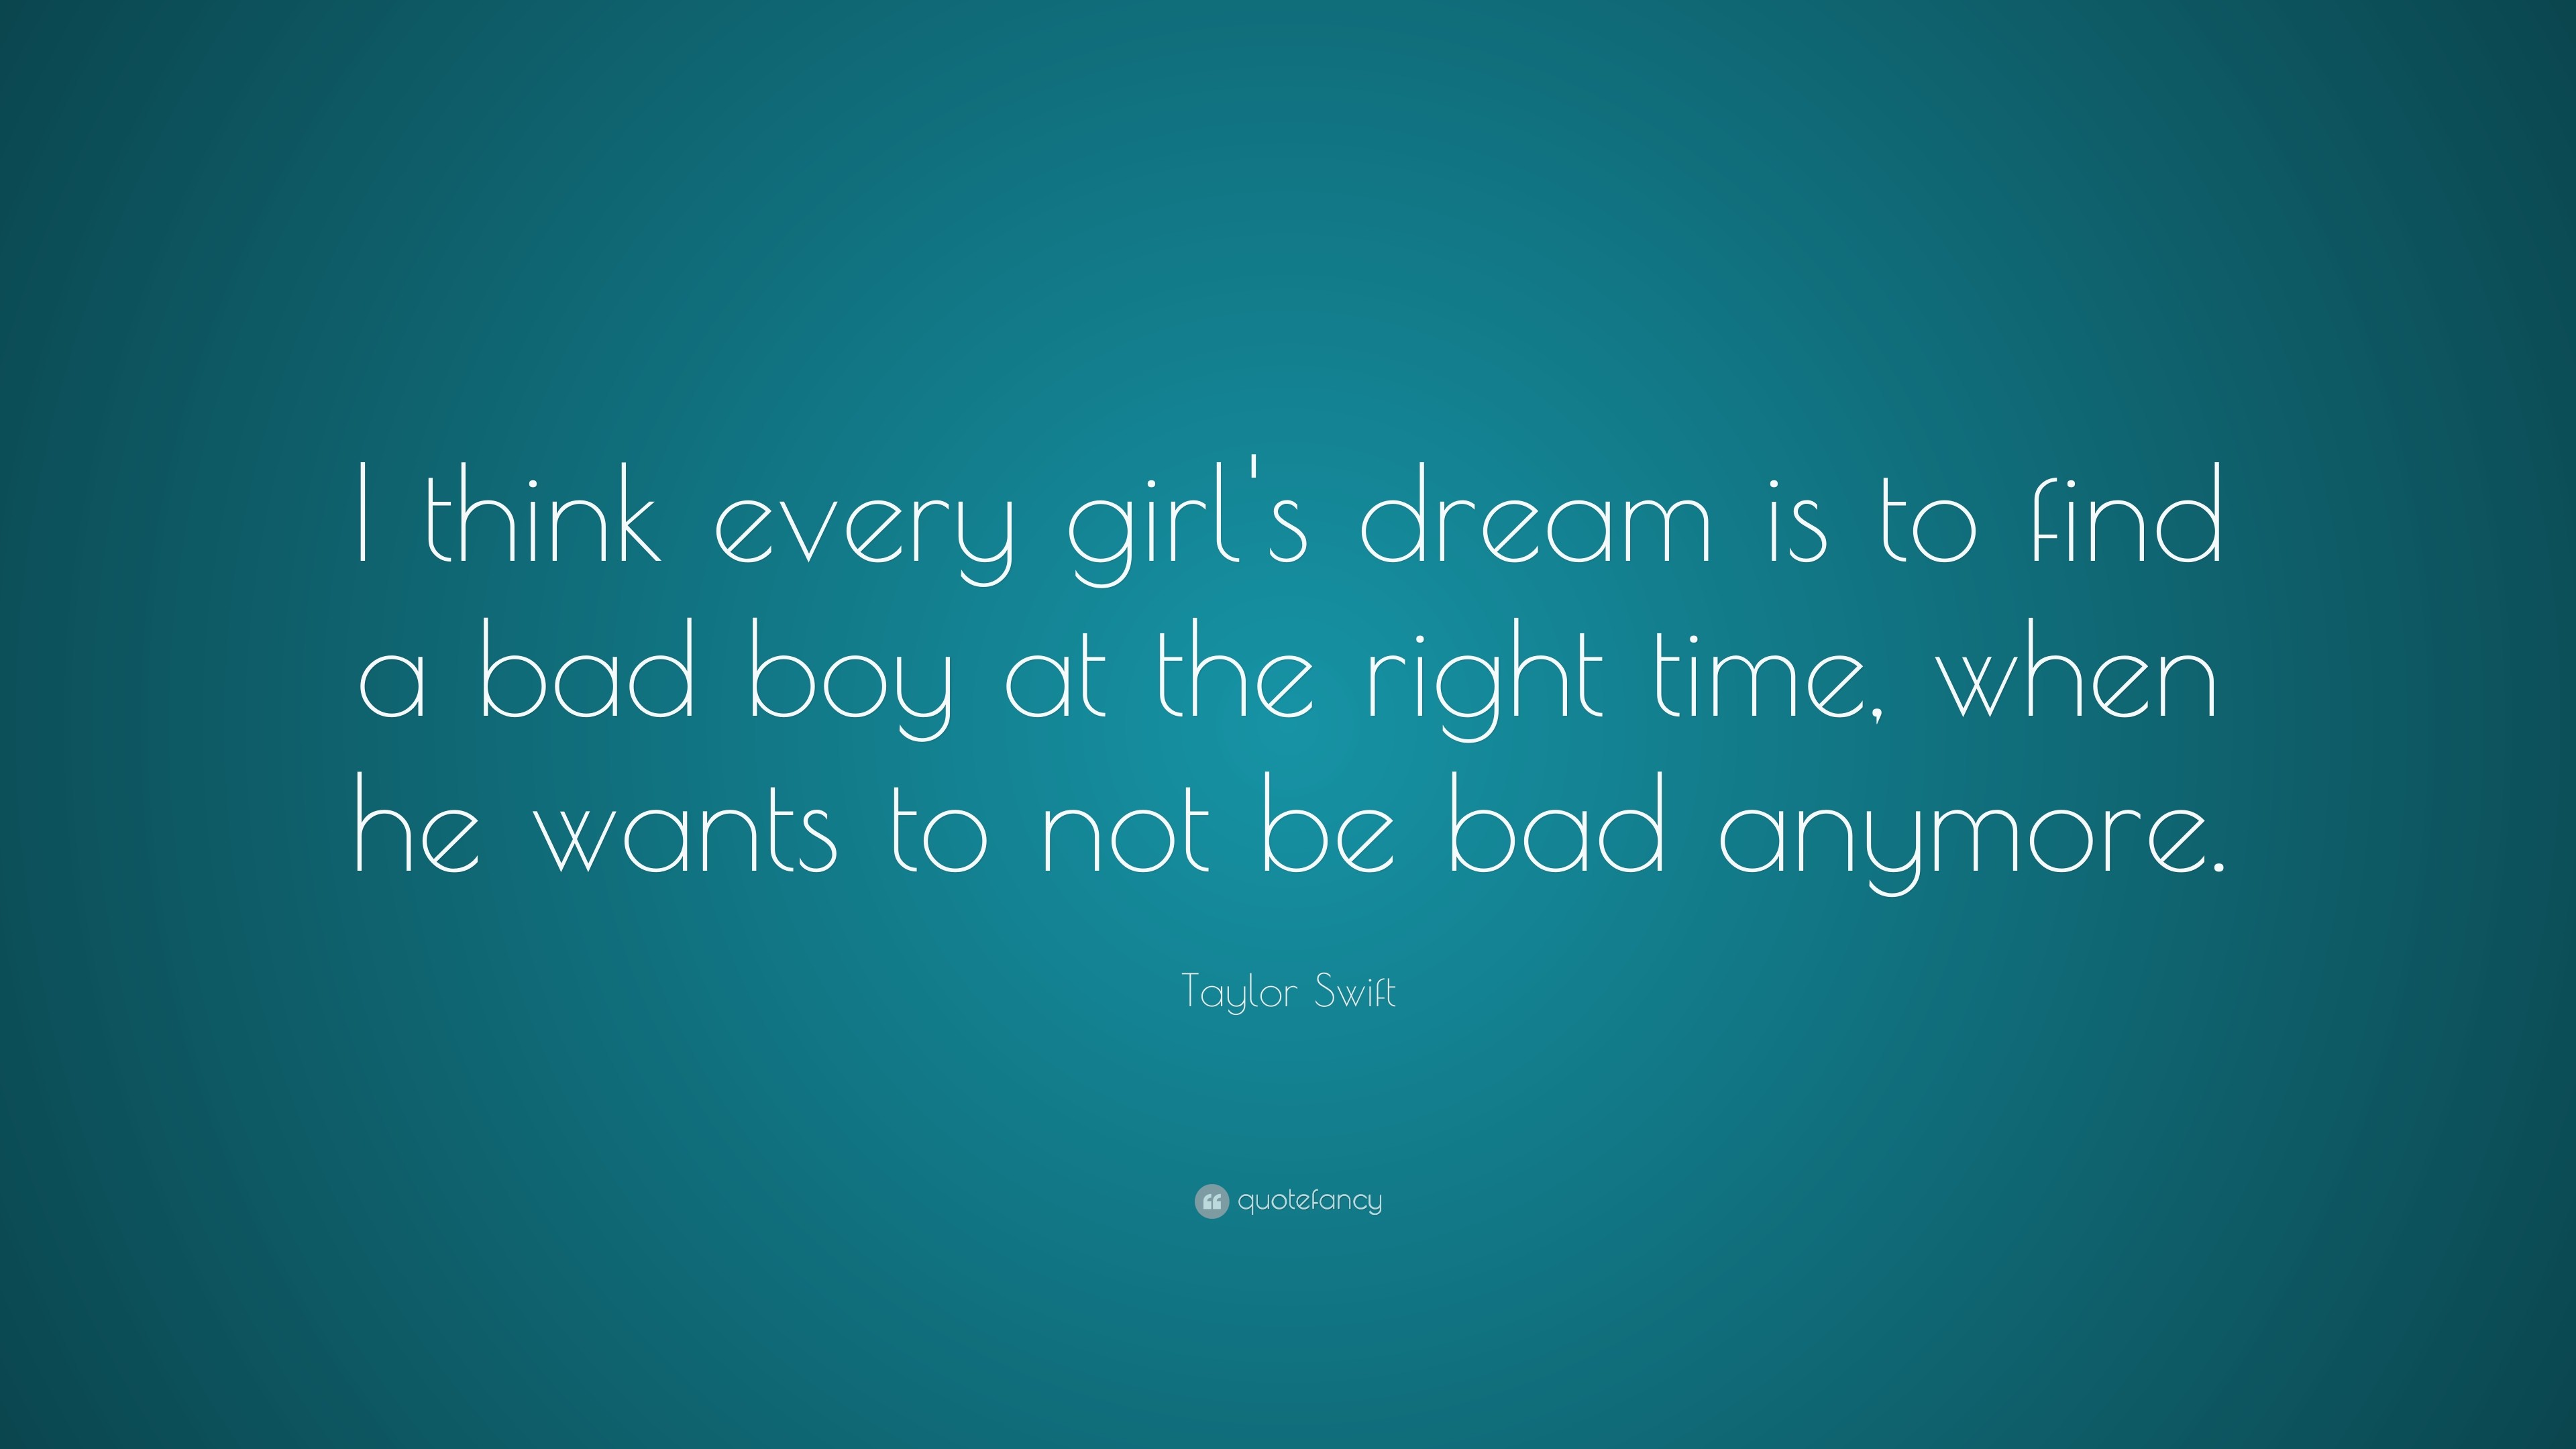 3840x2160 Taylor Swift Quote: “I think every girl's dream is to find a bad boy